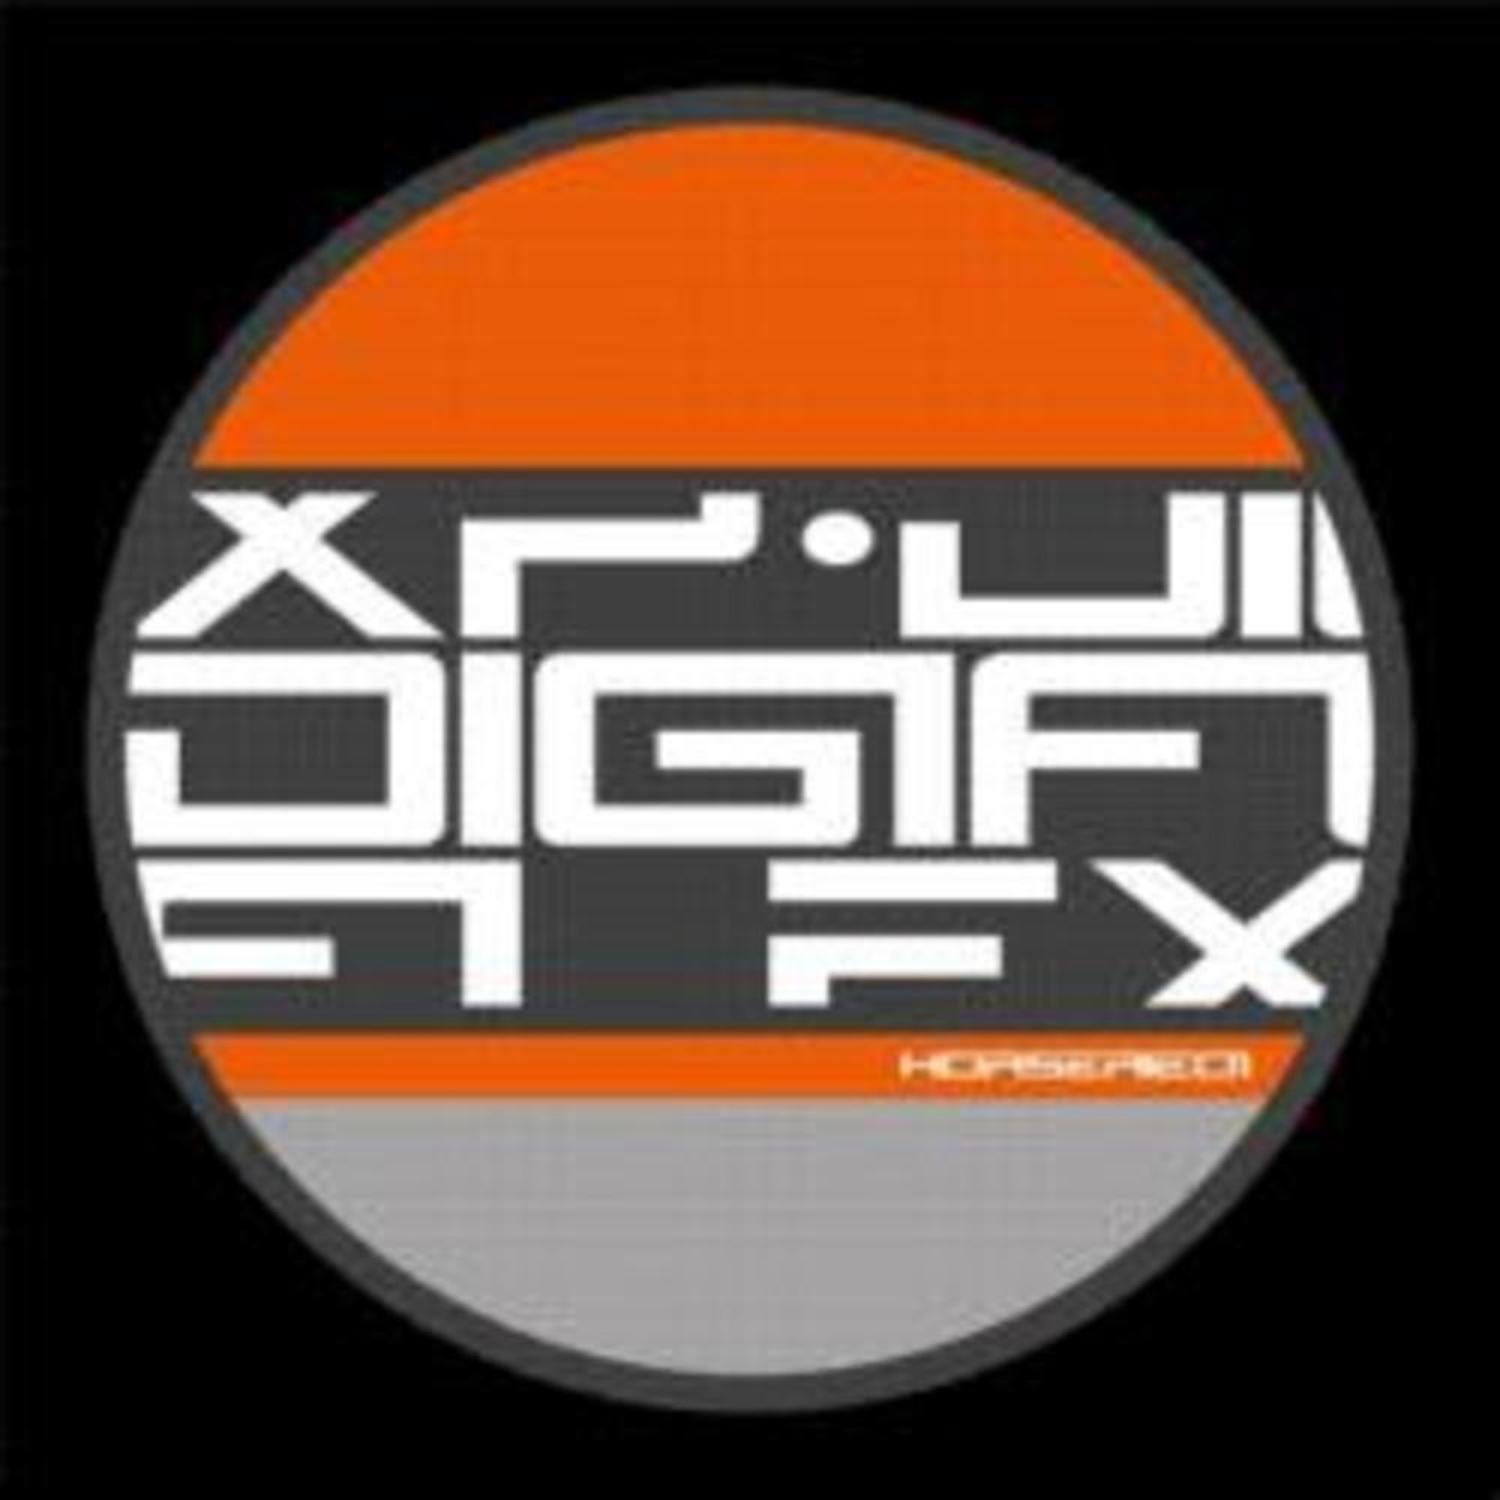 Xp Digiflex - THE RABBITS NAME WAS / MAD COWS ON ACID